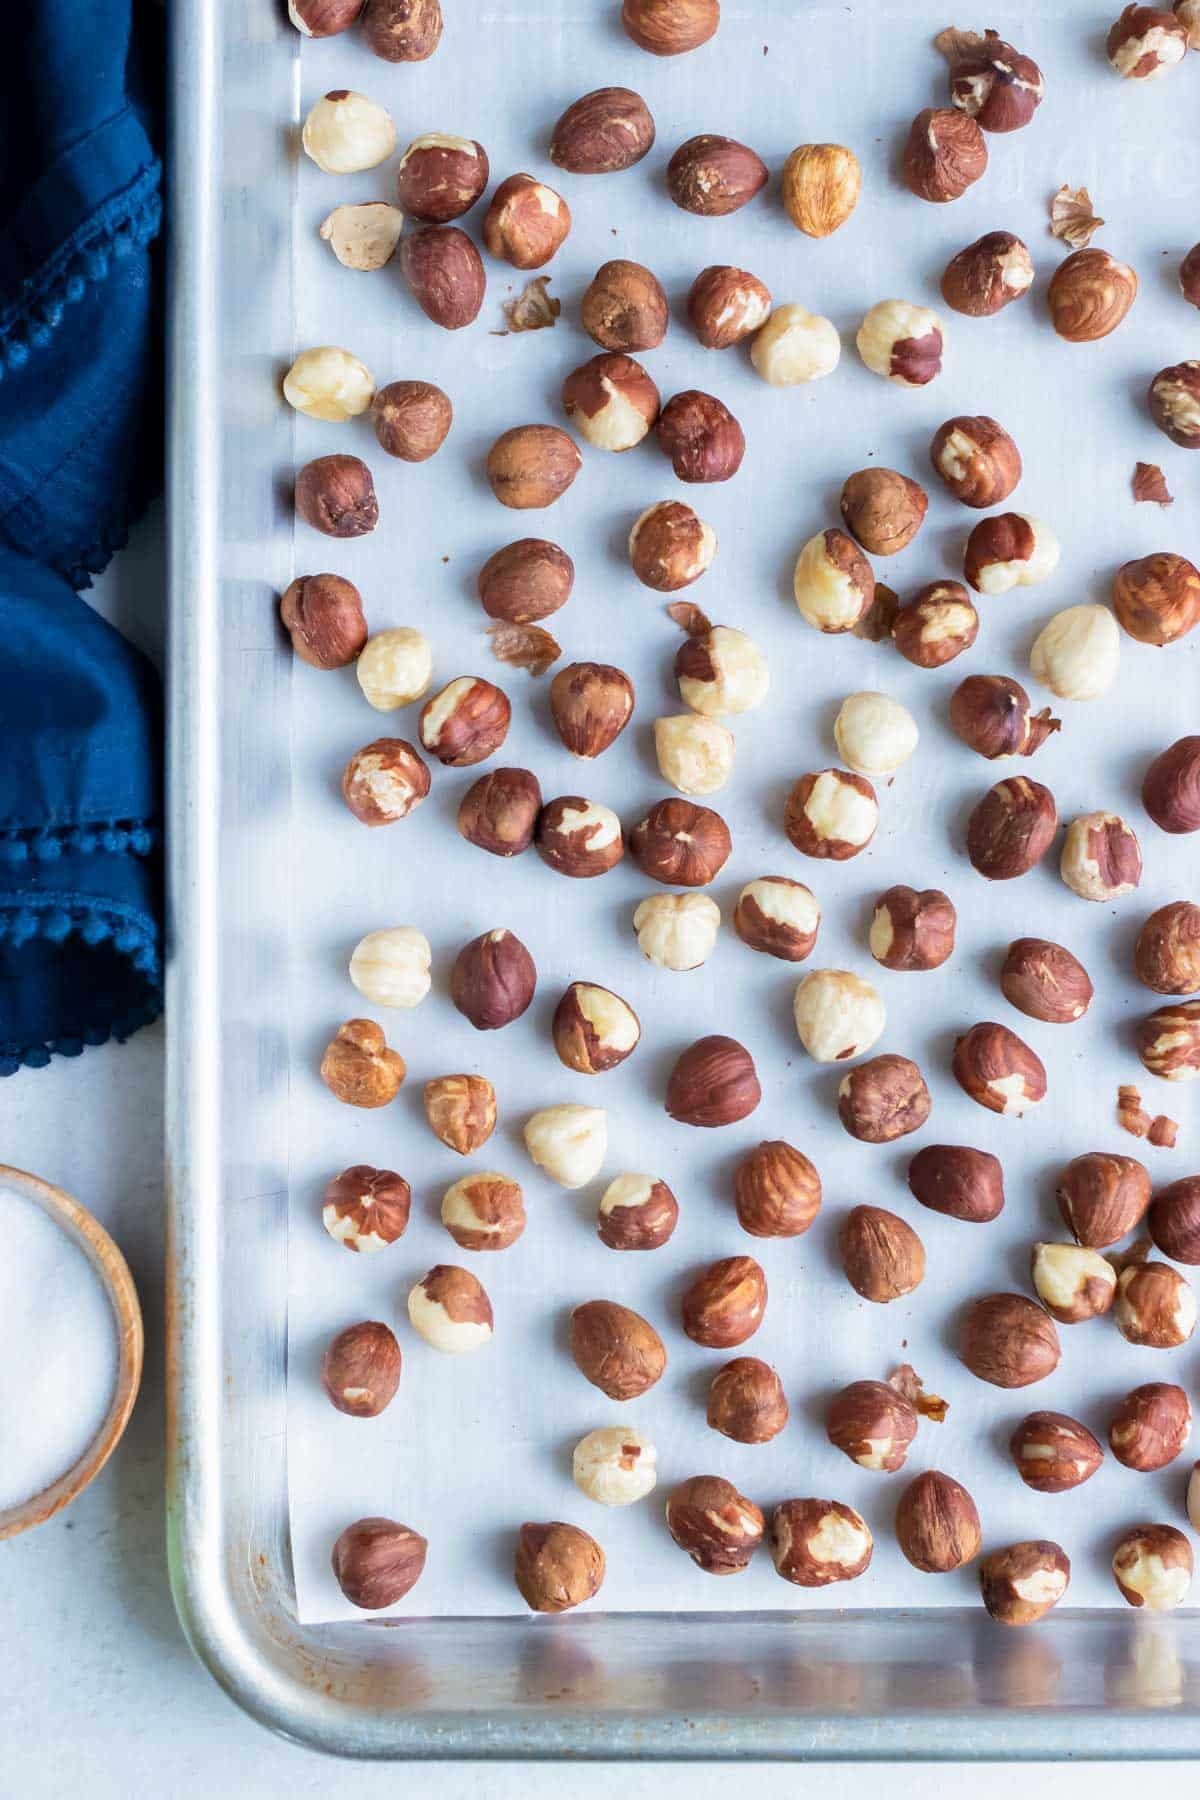 Hazelnuts are baked in the oven for the perfect nutty, toasted flavor.